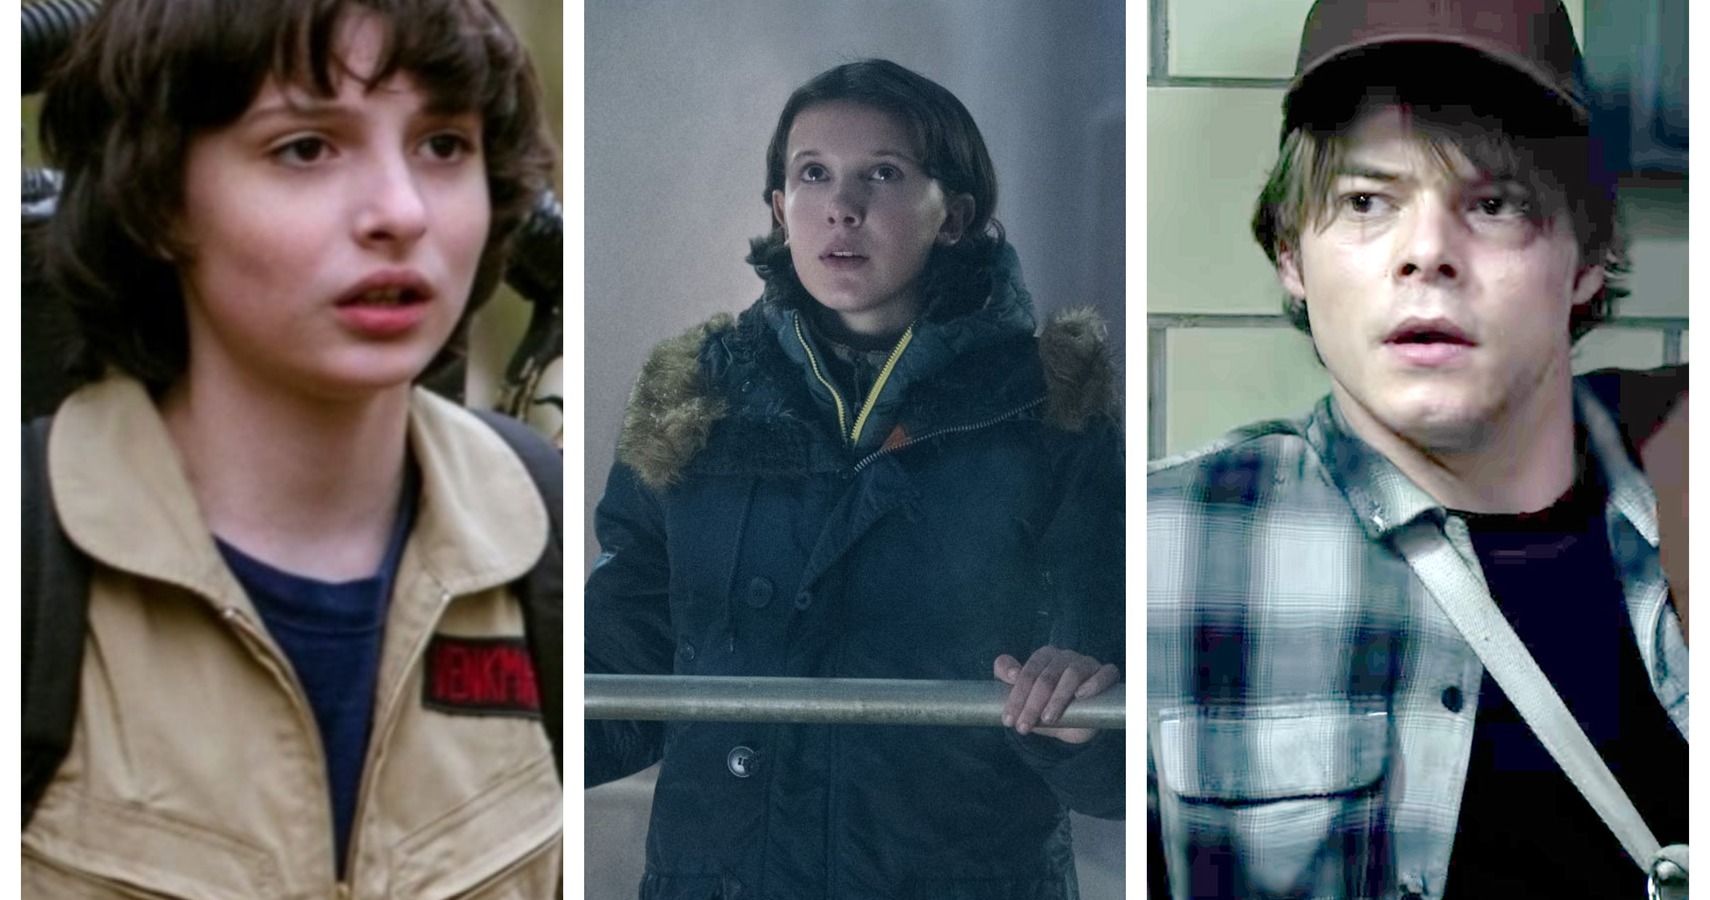 Upcoming Movies With The Kids From Stranger Things